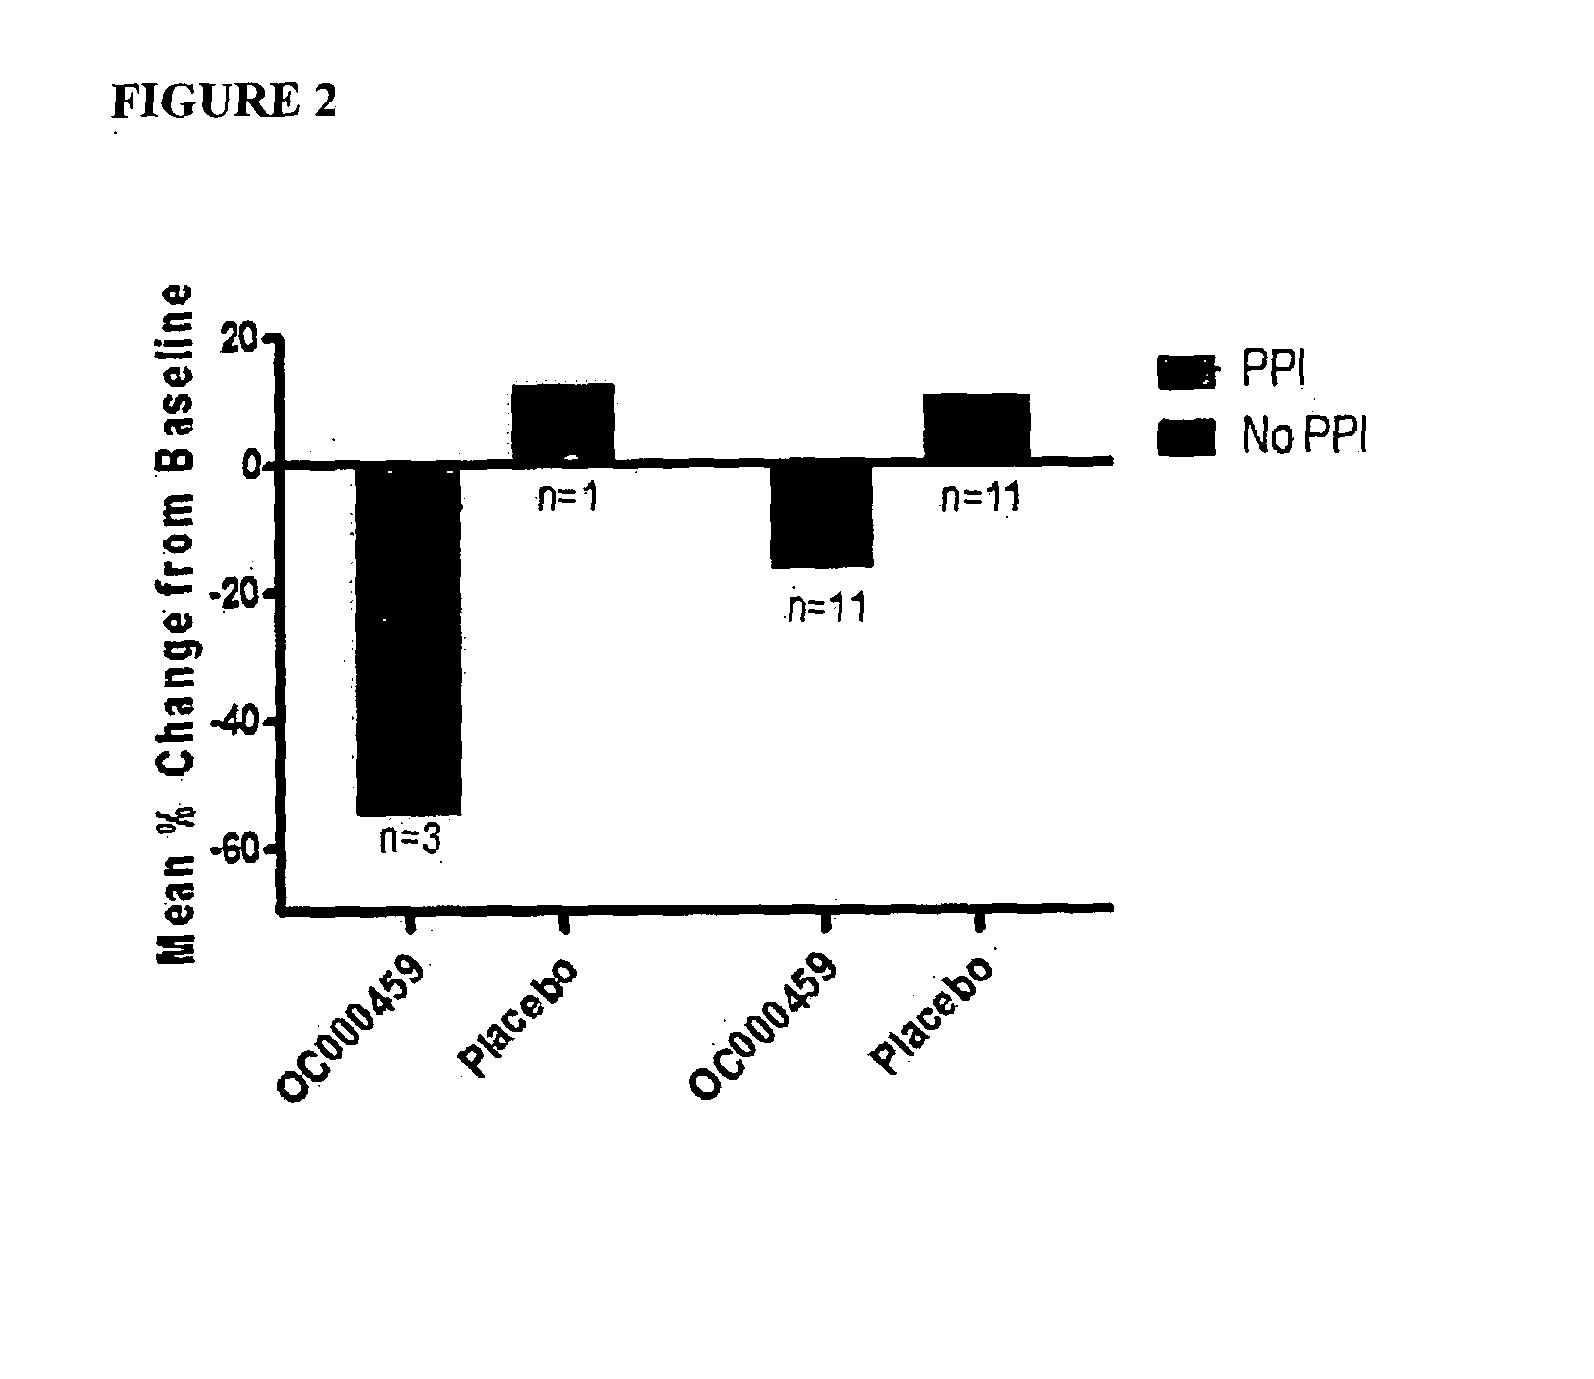 Combination of CRTH2 Antagonist and a Proton Pump Inhibitor for the Treatment of Eosinophilic Esophagitis